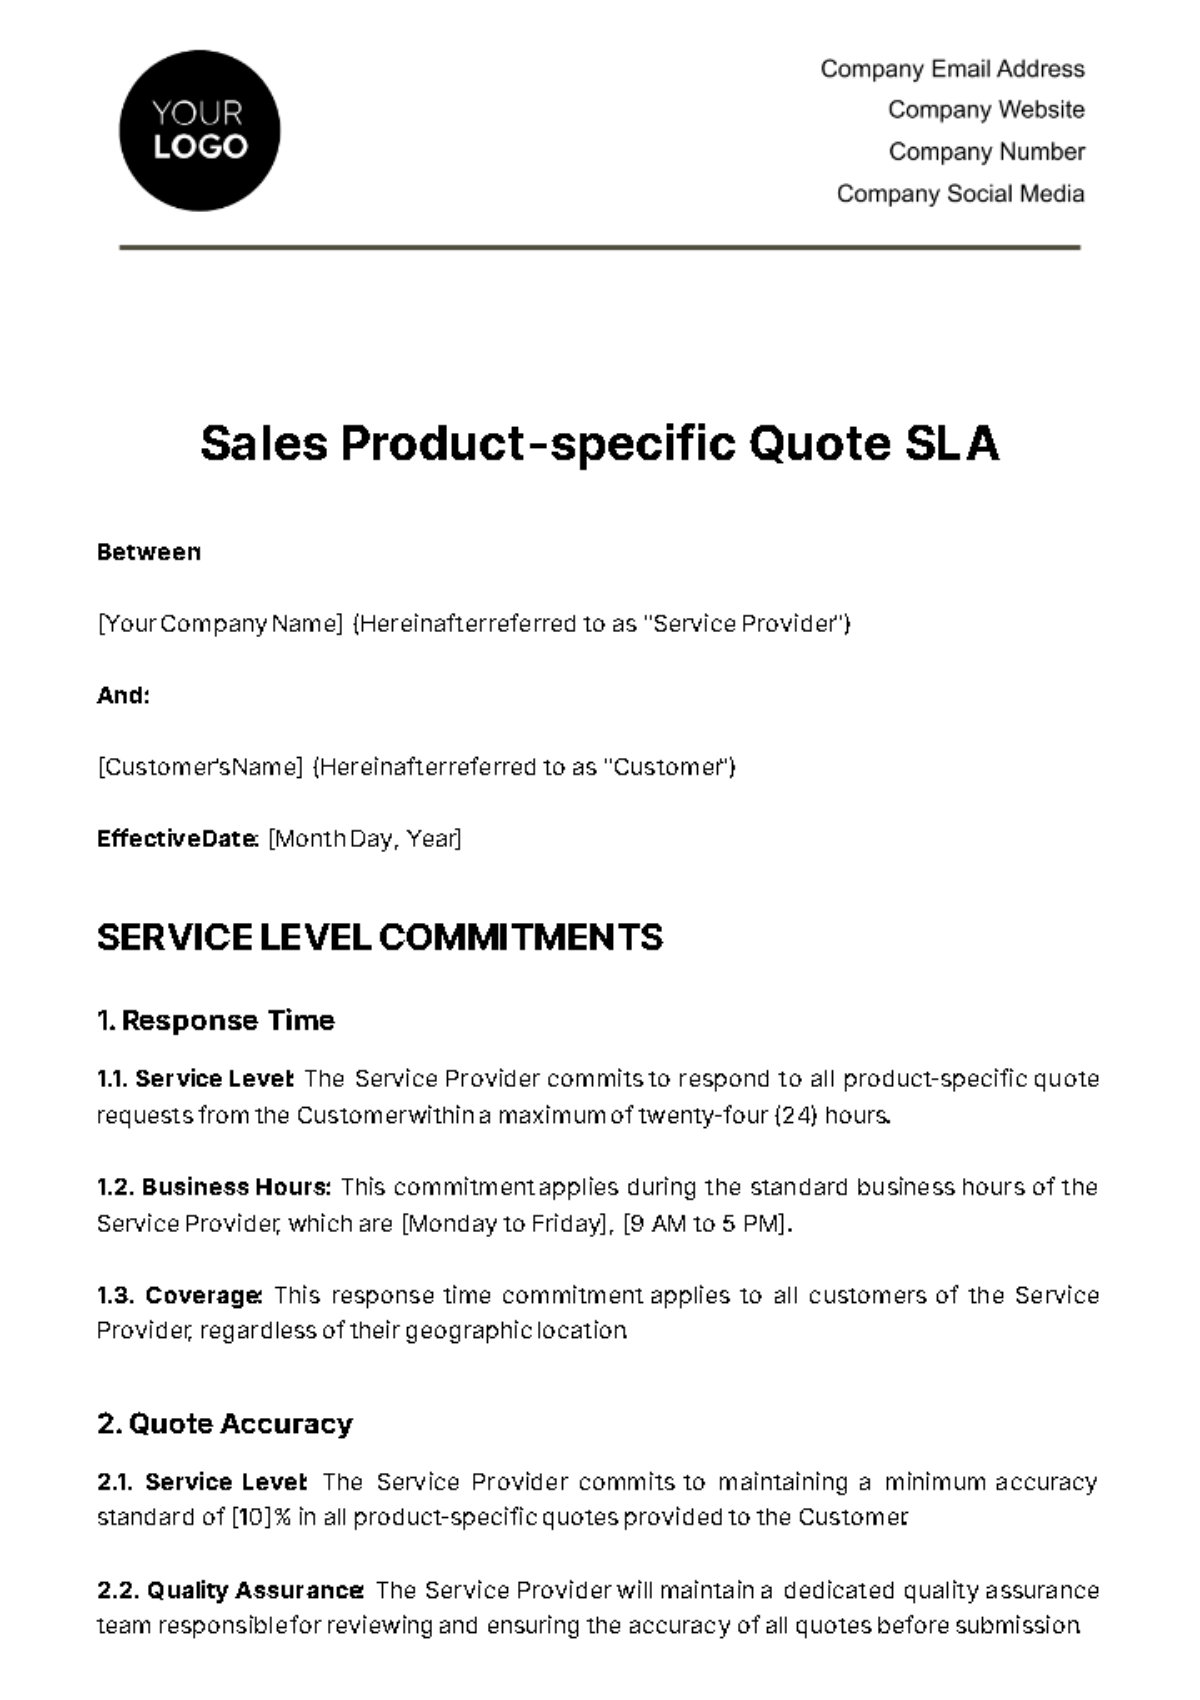 Sales Product-specific Quote SLA Template